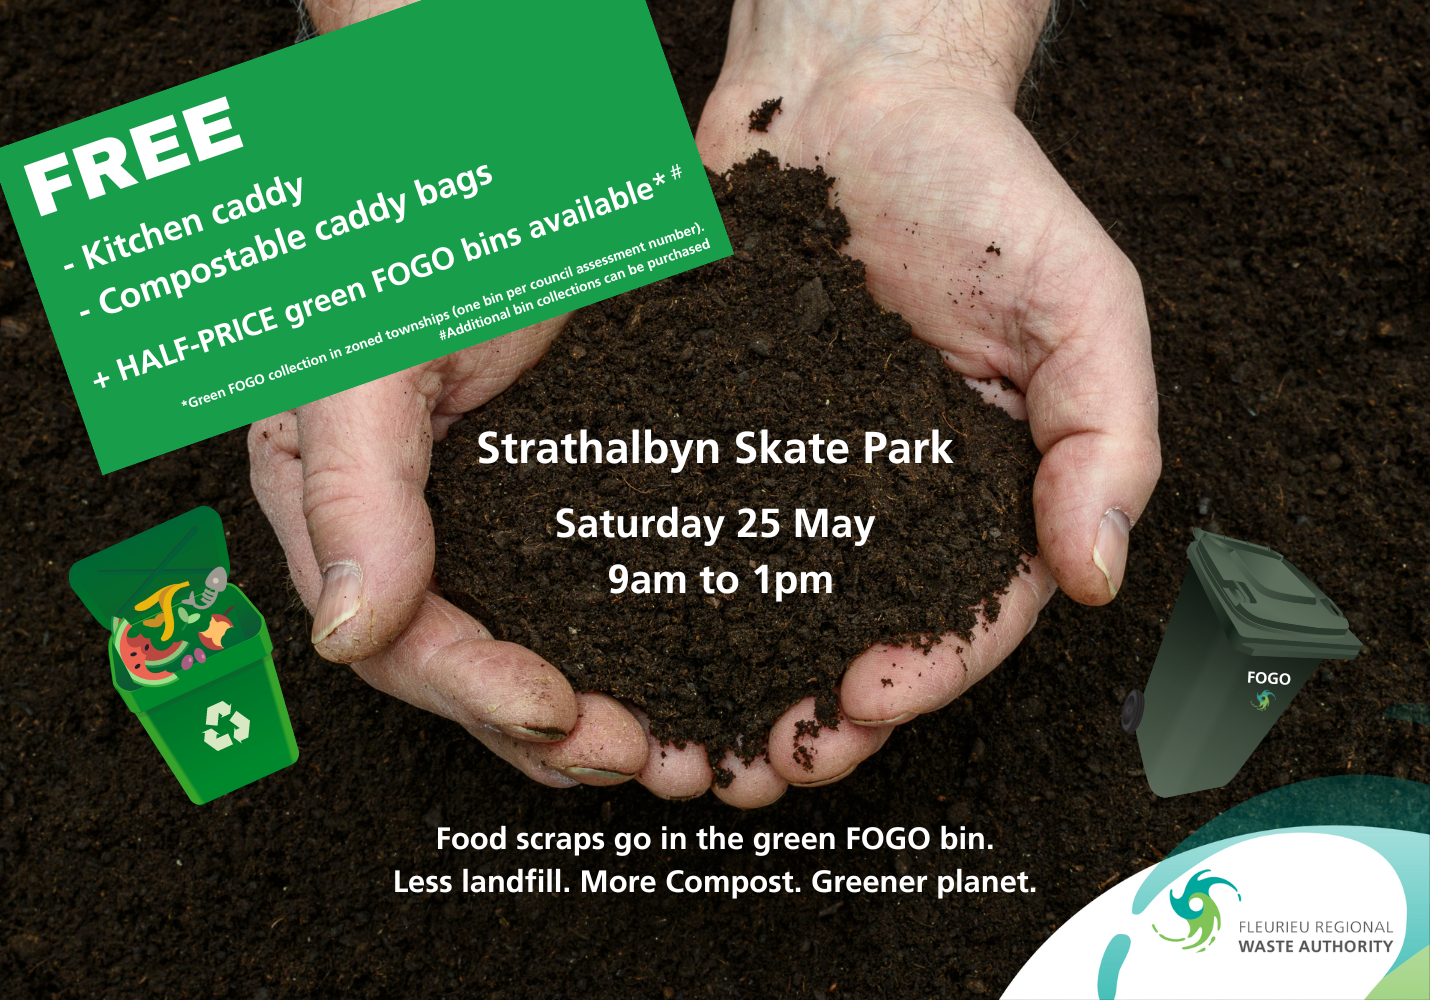 FOGO Focus Day at Strathalbyn Saturday 25 May 2024 - Free kitchen caddy, compostable bags and half-priced green FOGO bins.